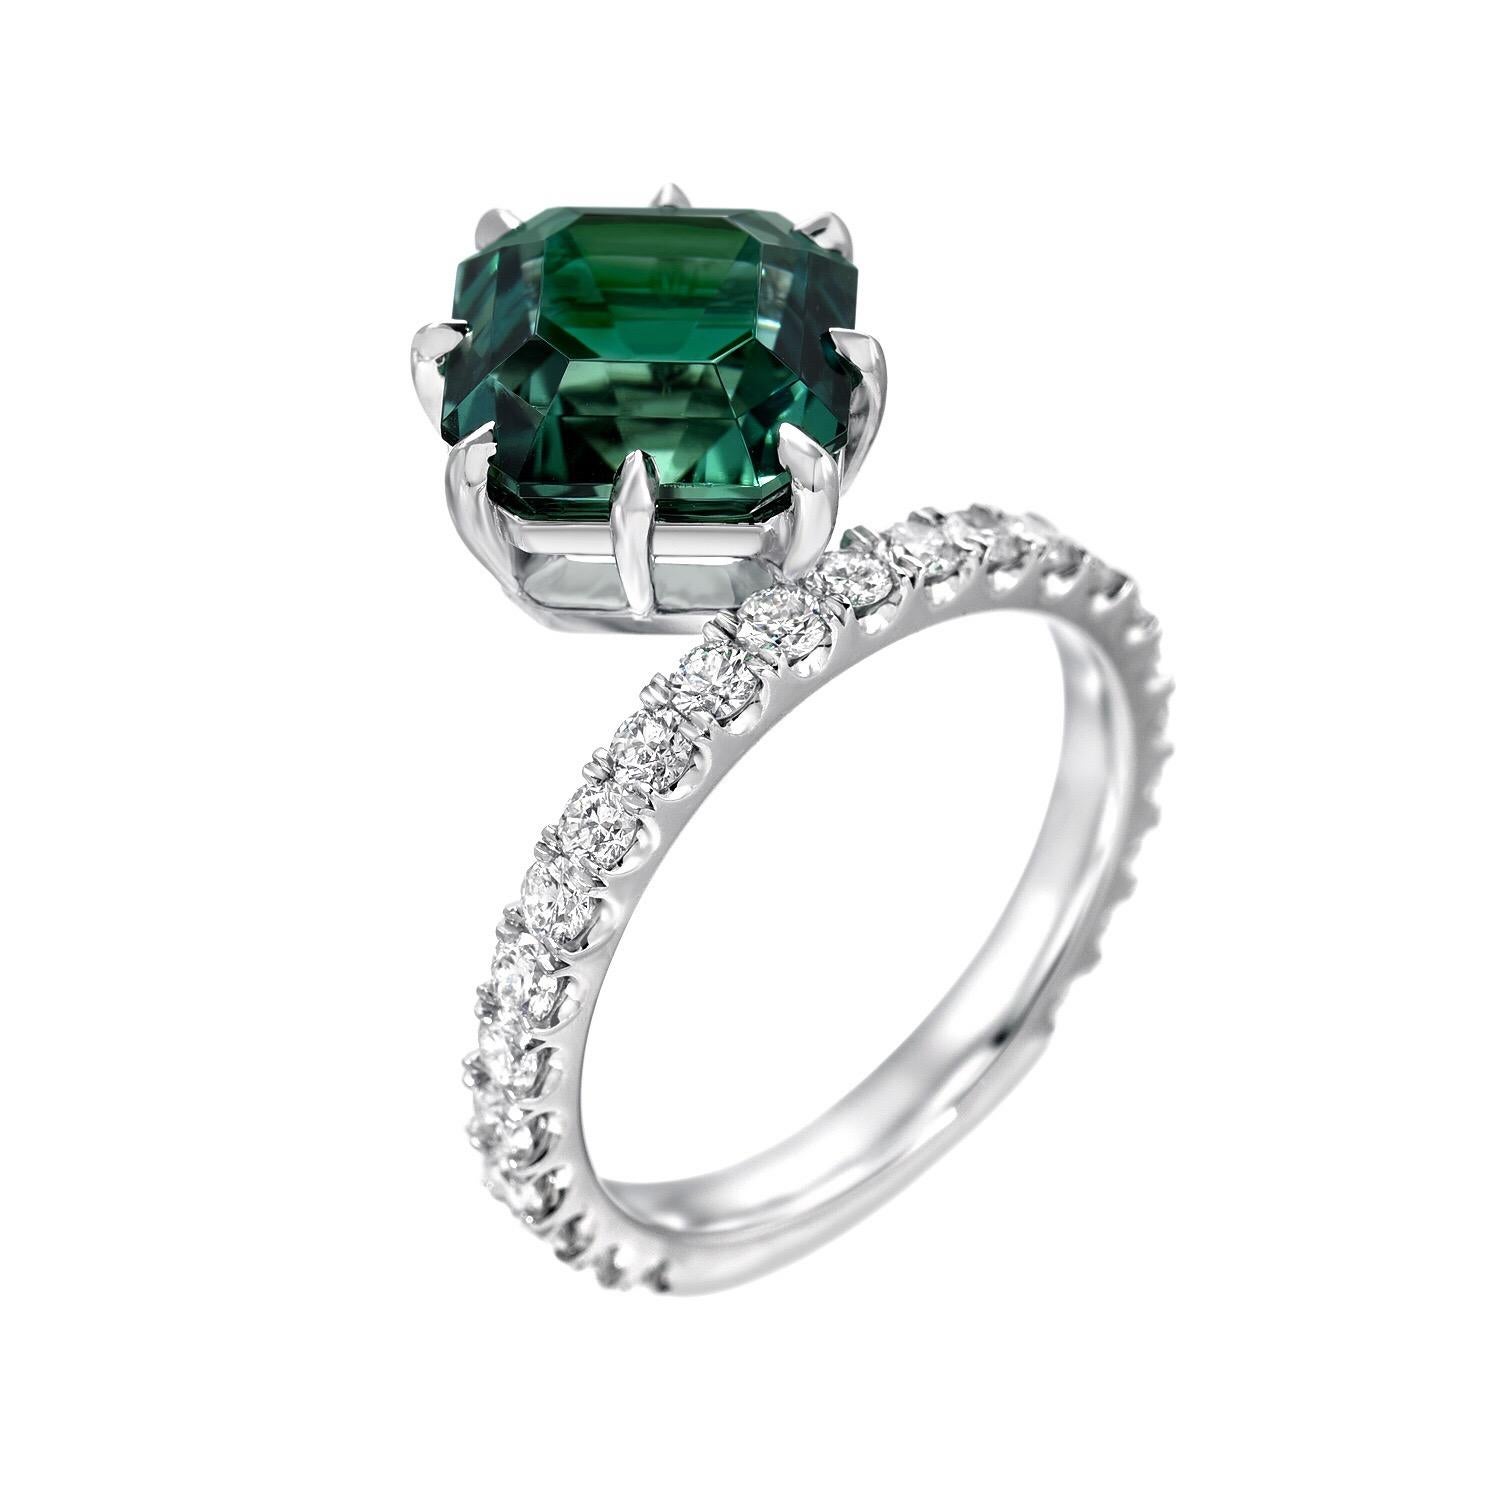 Pristine 4.17 carat square emerald cut, vivid Green Tourmaline and 0.82 carats total of round brilliant diamonds, are hand set in this unique 8 claw prong, cocktail platinum ring. This vibrant Green Tourmaline showcases superior color, cut and